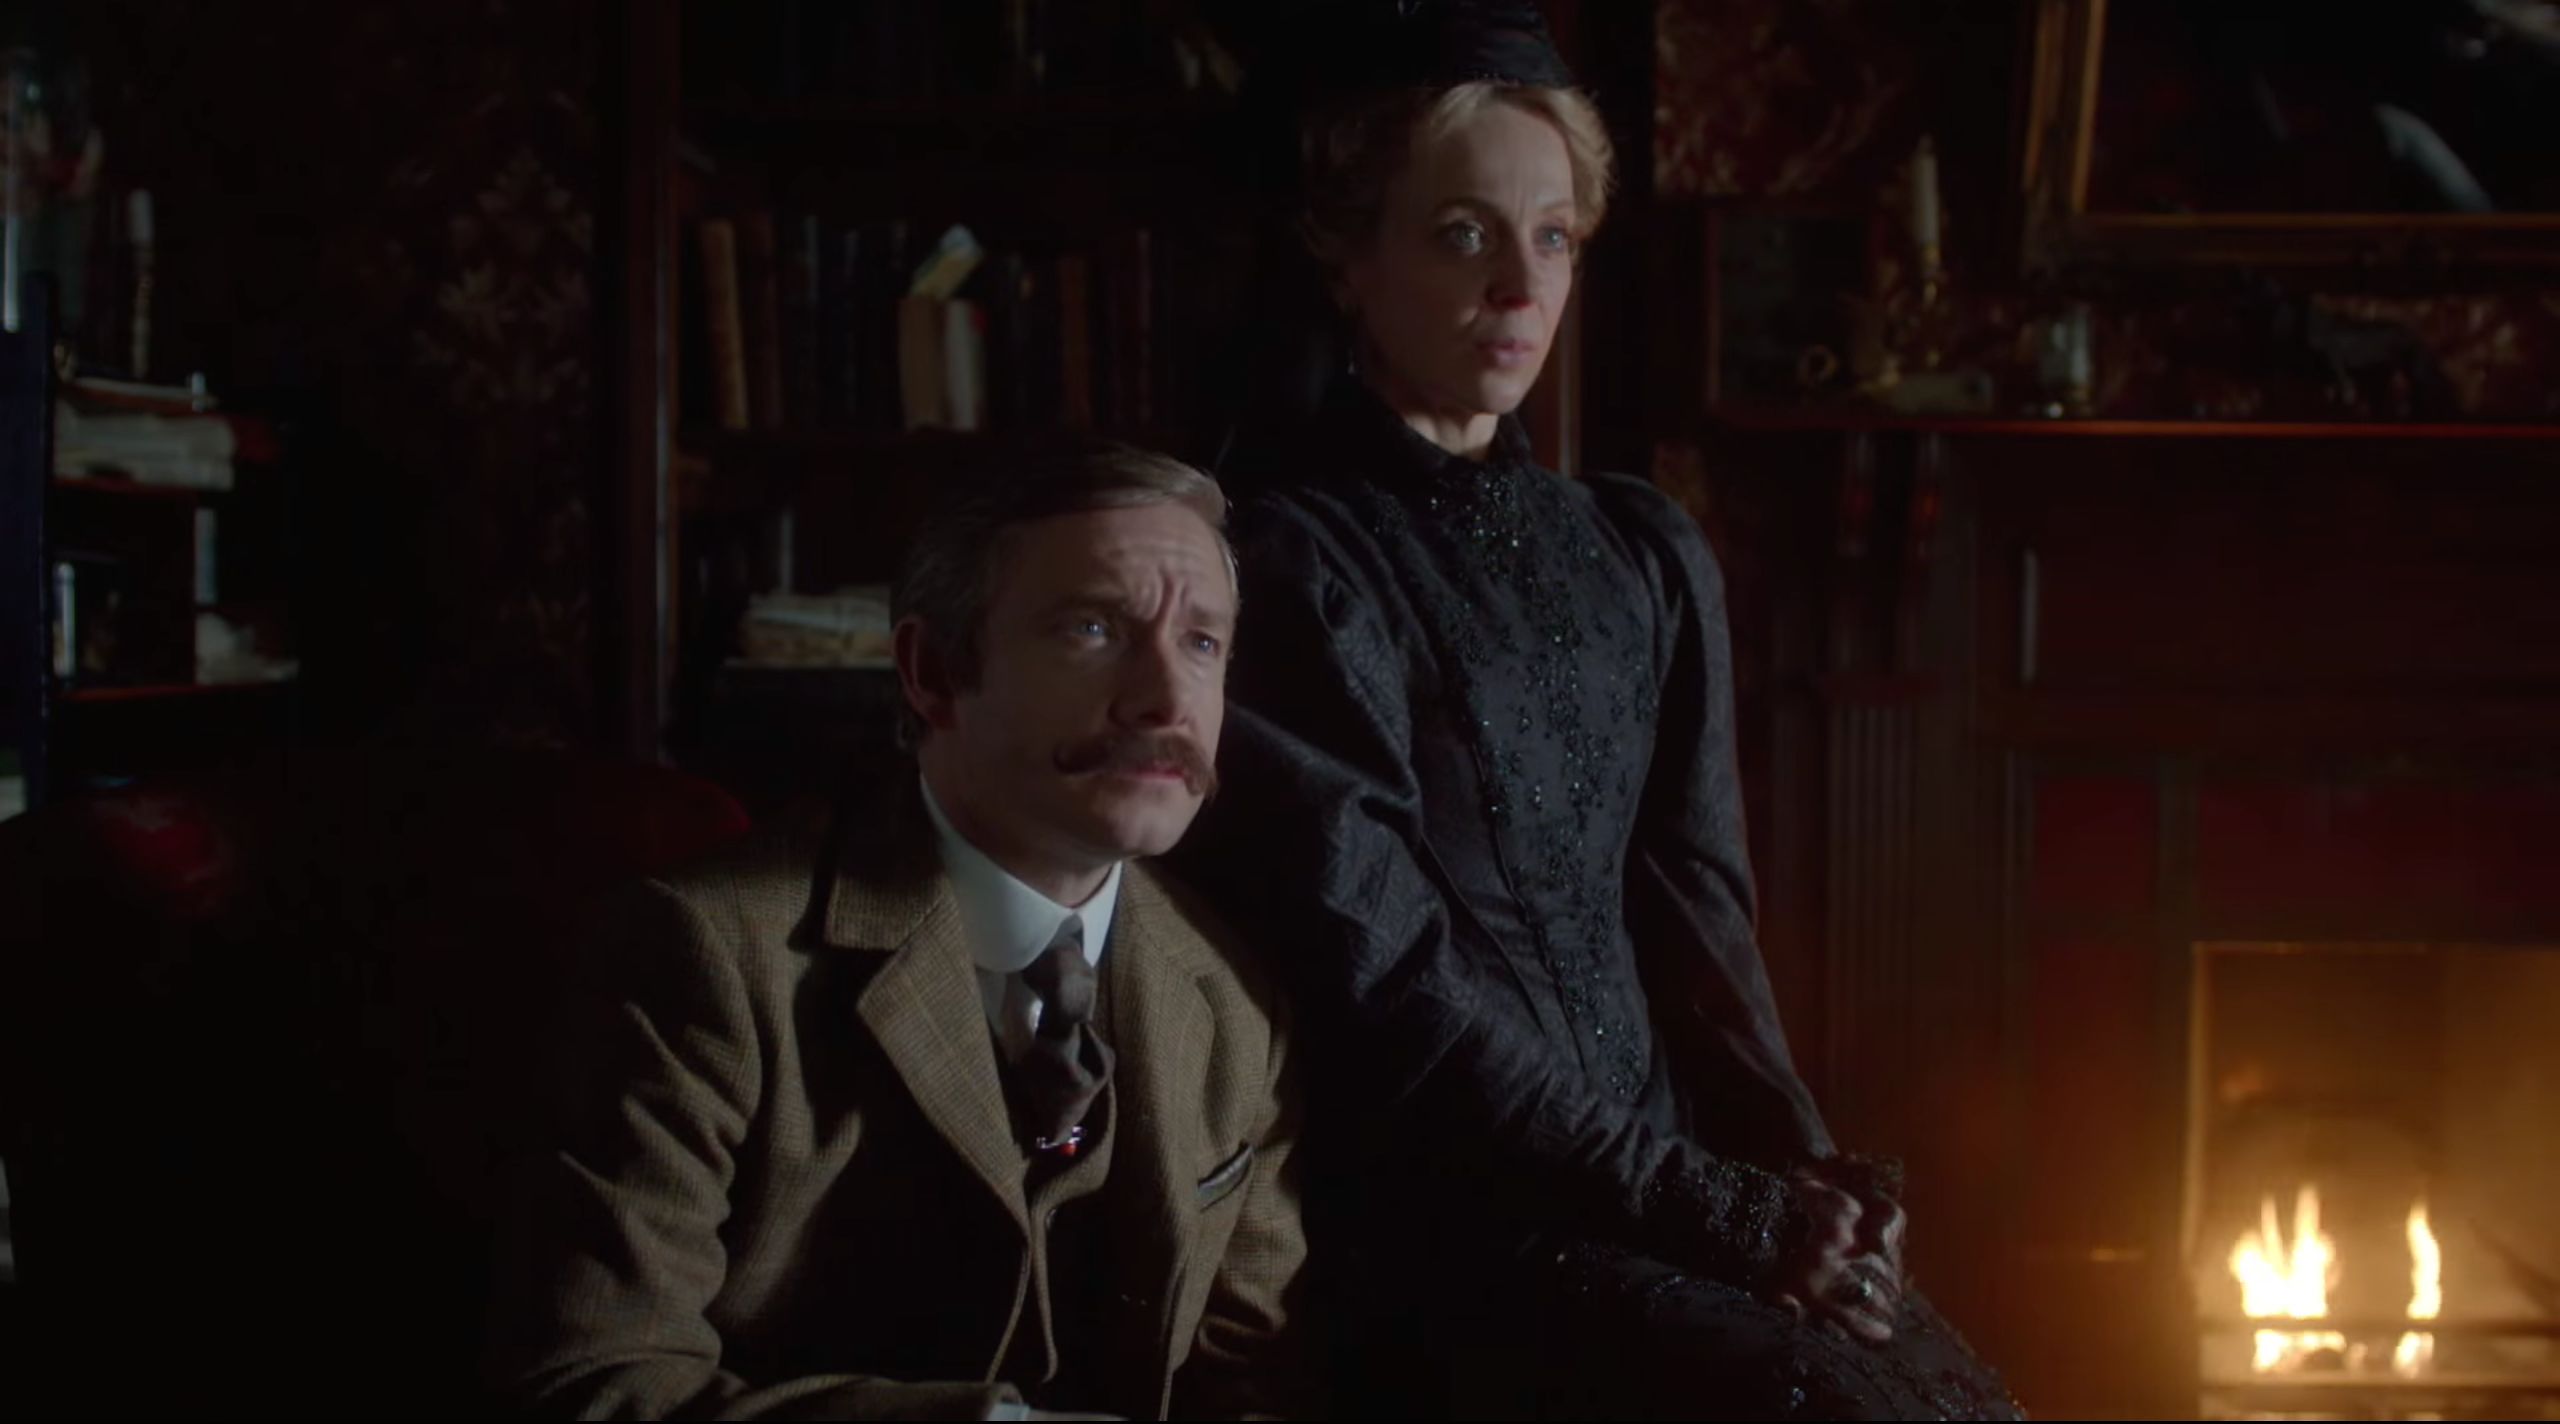 gothic-horror-for-sherlock-before-season-4-but-who-exactly-is-the-abominable-bride-free-718114